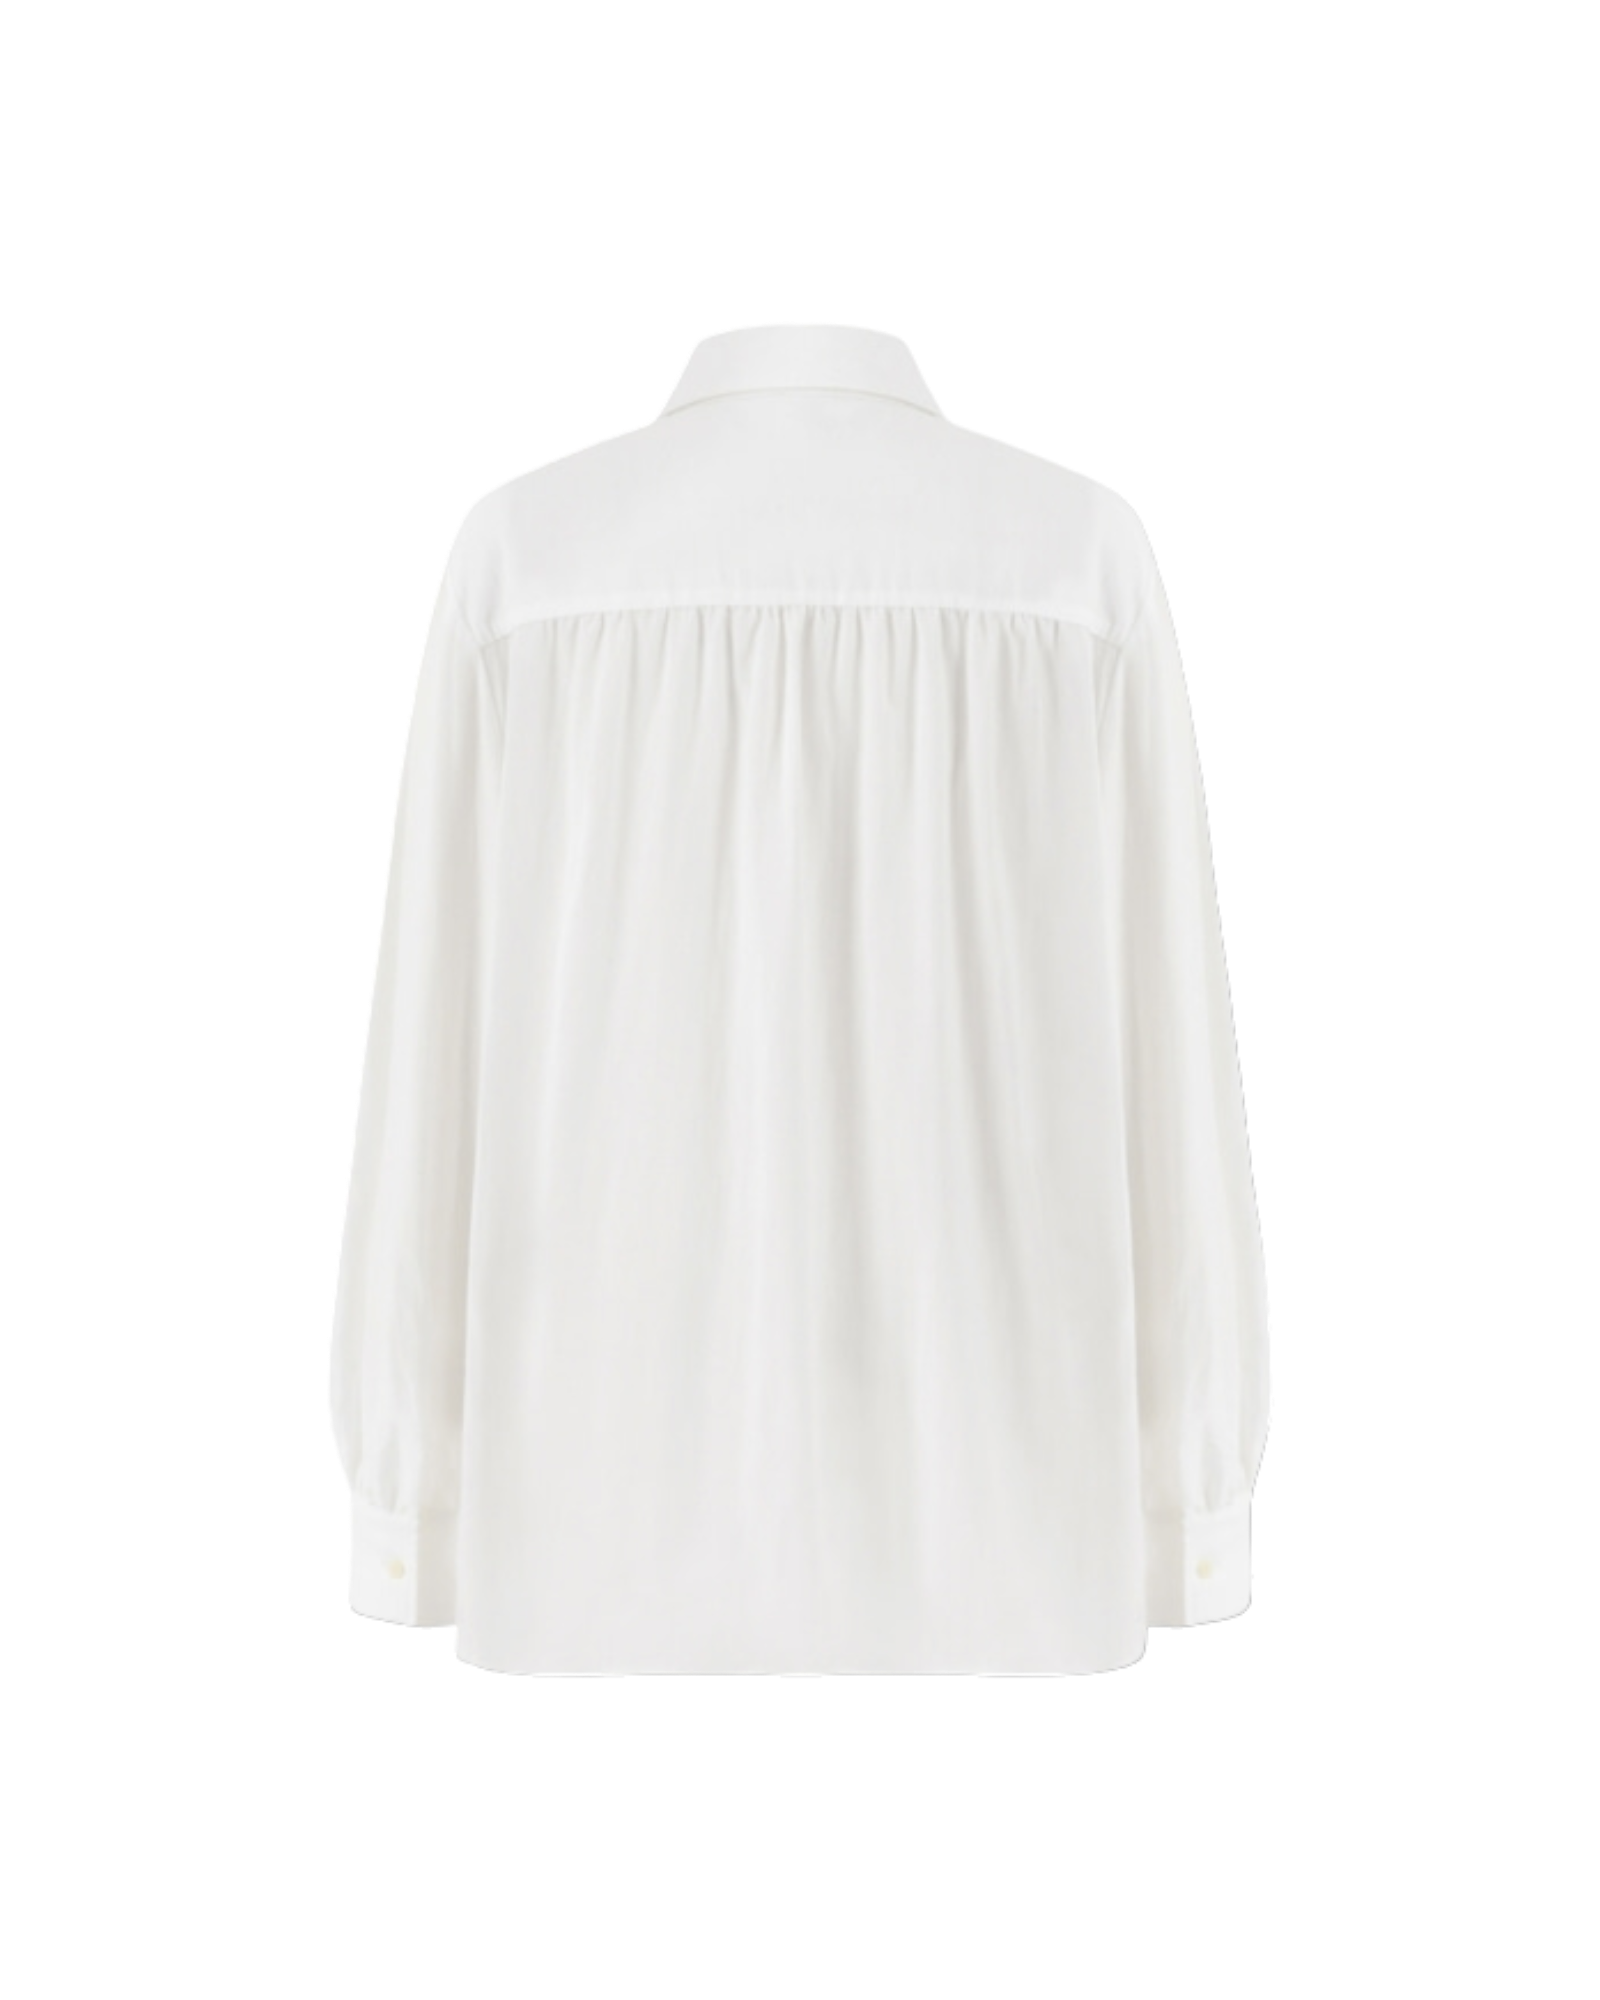 Shirring Blouse In Ivory